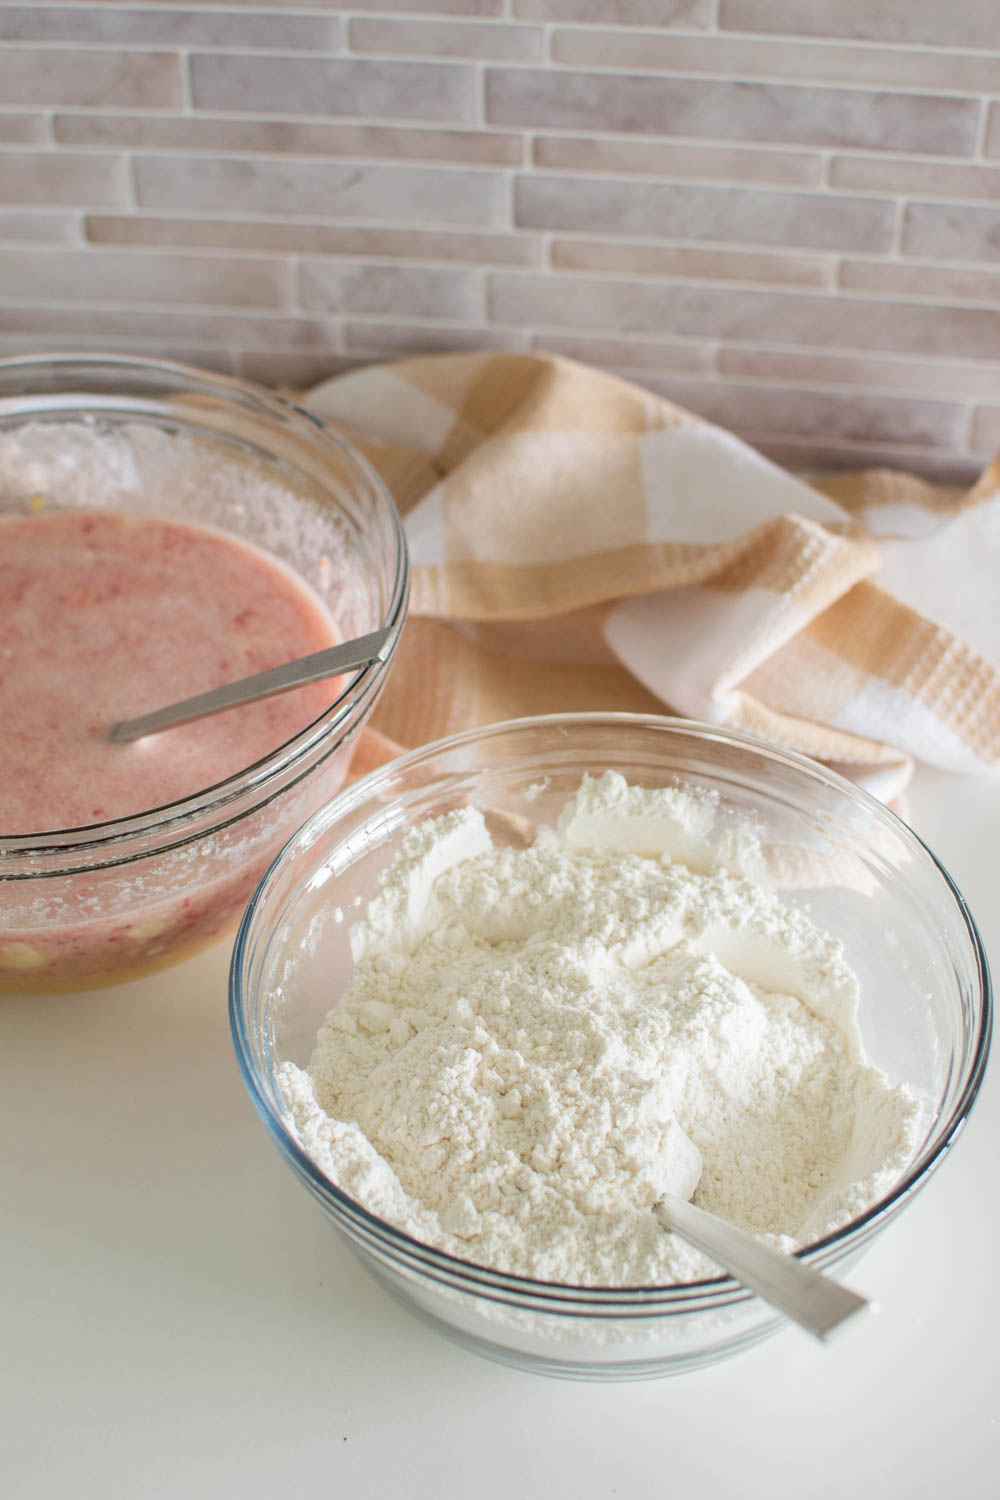 A bowl of wet ingredients and another bowl of dry ingredients to make a strawberry cake